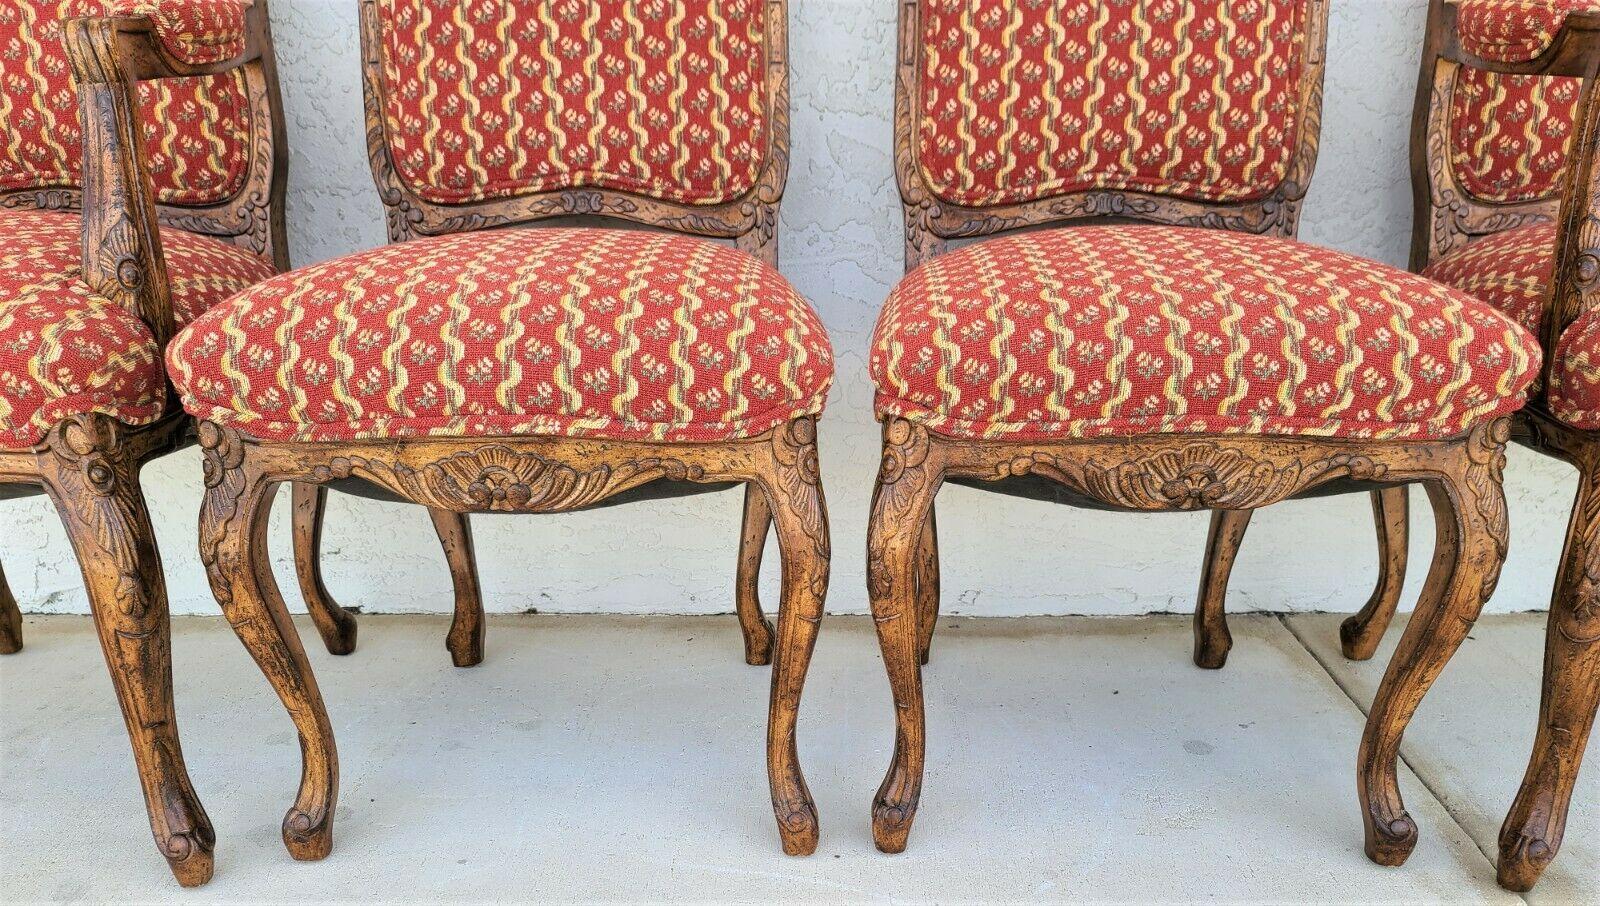 '4' Newly Upholstered French Provincial Louis XV Dining Chairs In Good Condition For Sale In Lake Worth, FL